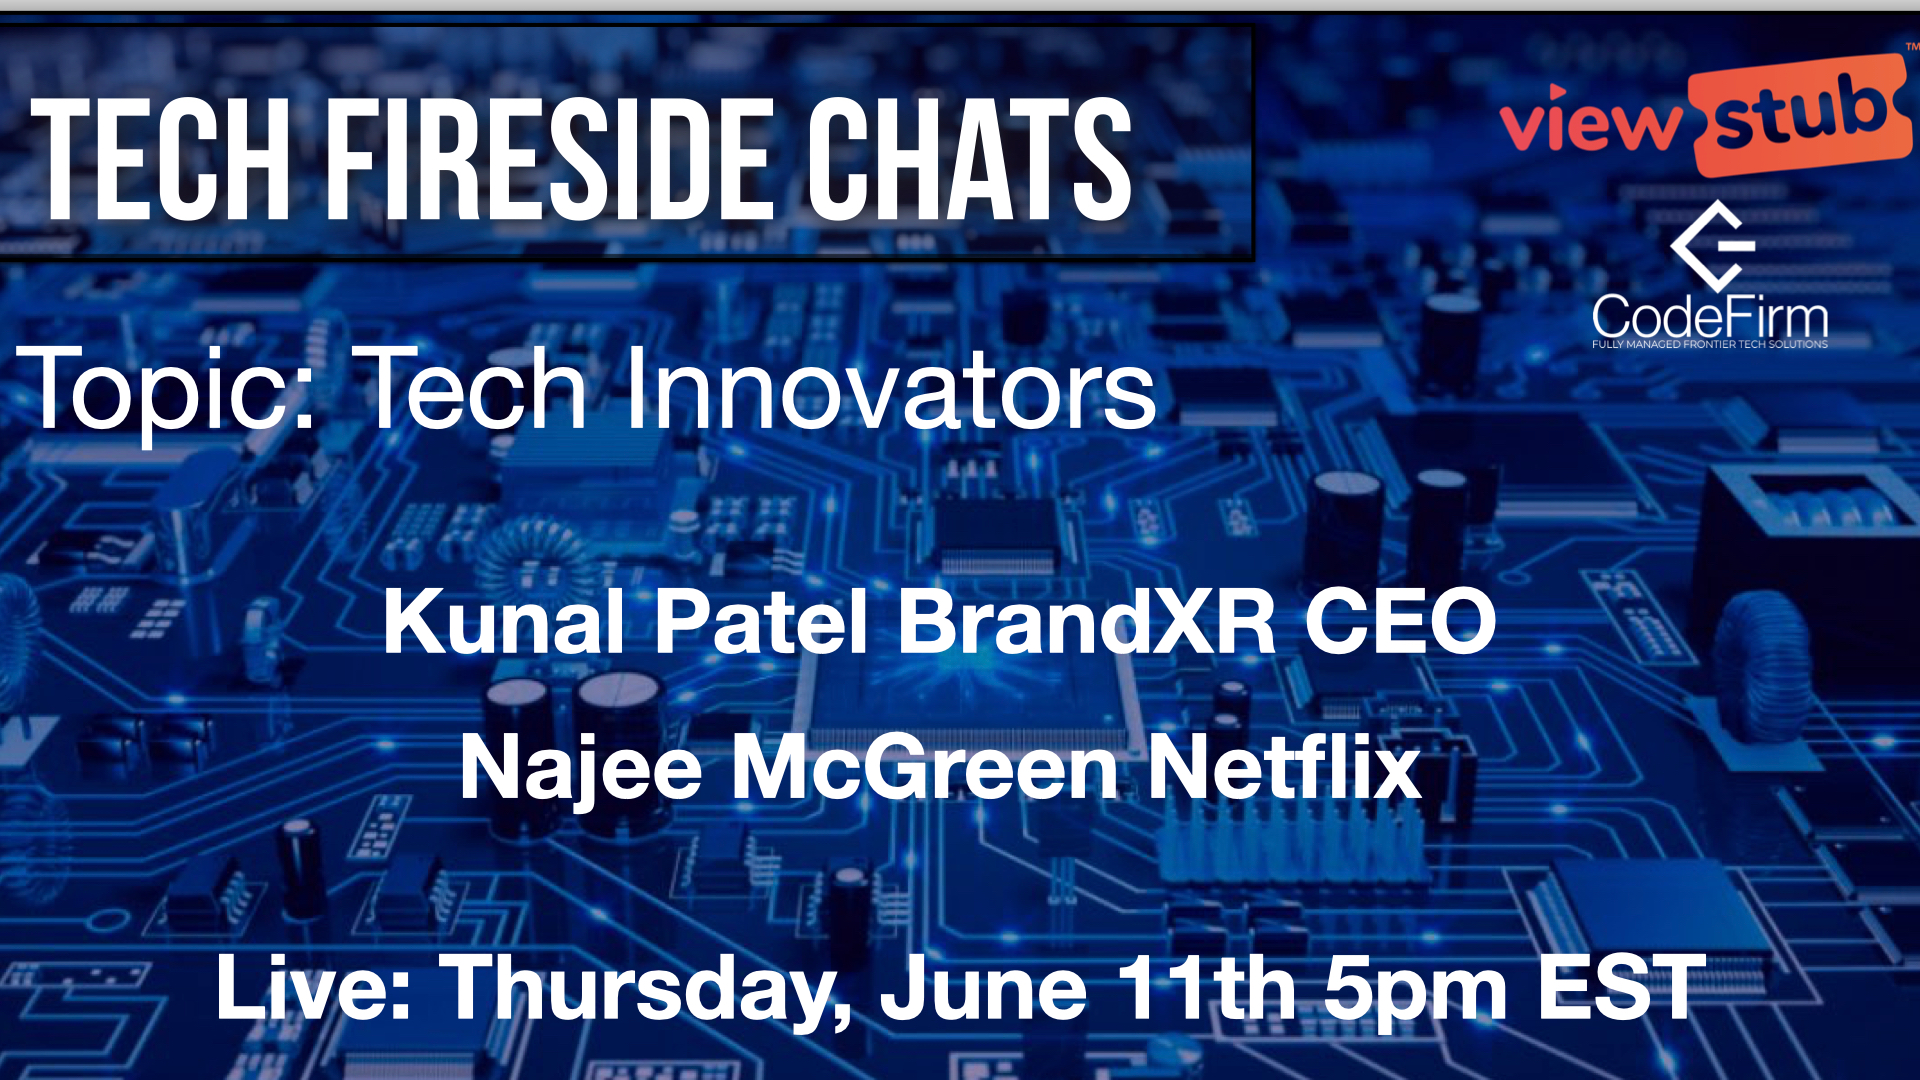 Photo for Fireside Chats Episode Tech Innovators on ViewStub